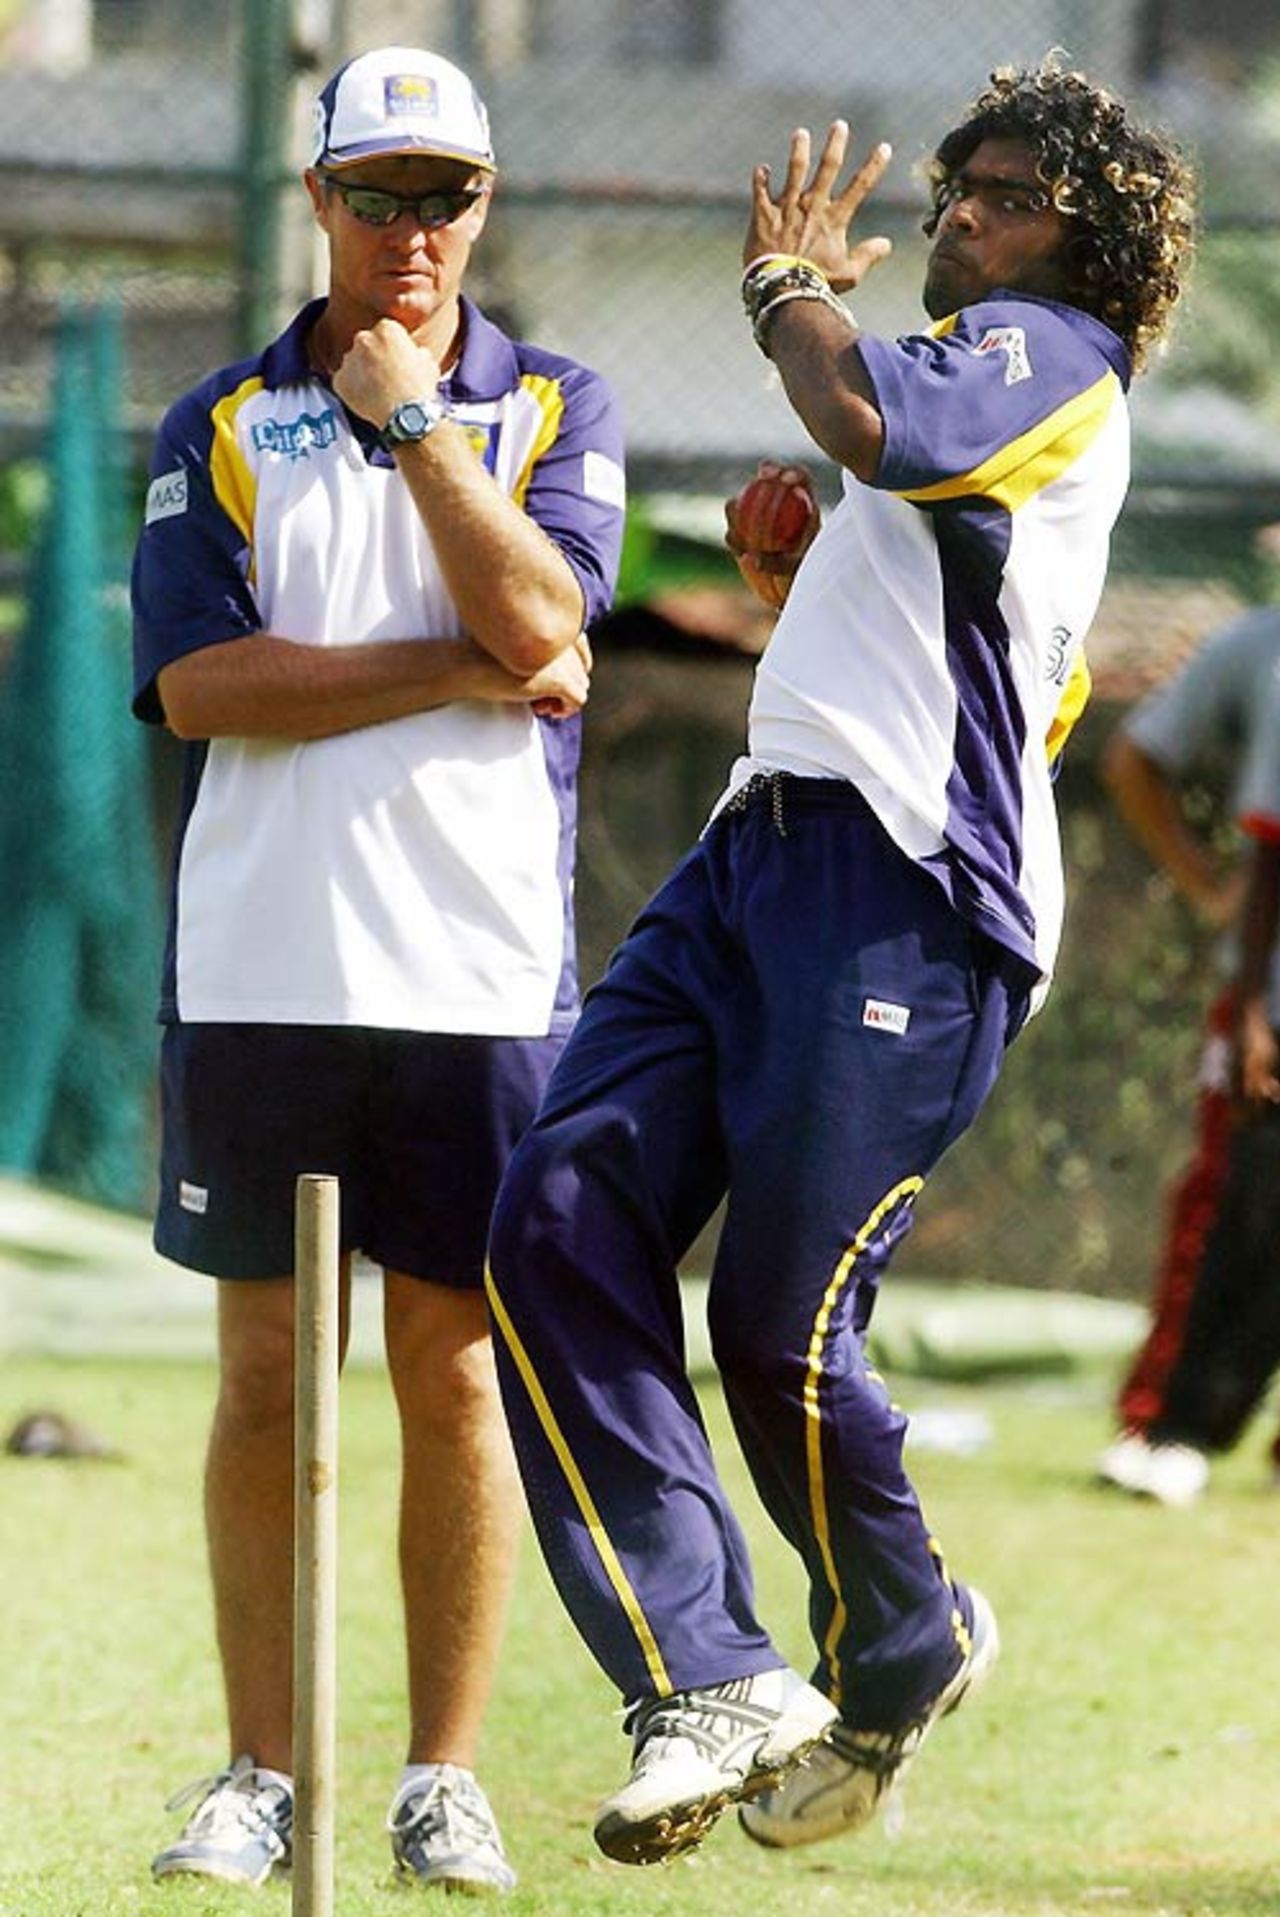 Lasith Malinga cuts loose at the nets as coach Trevor Penney looks on, Colombo, July 1, 2007